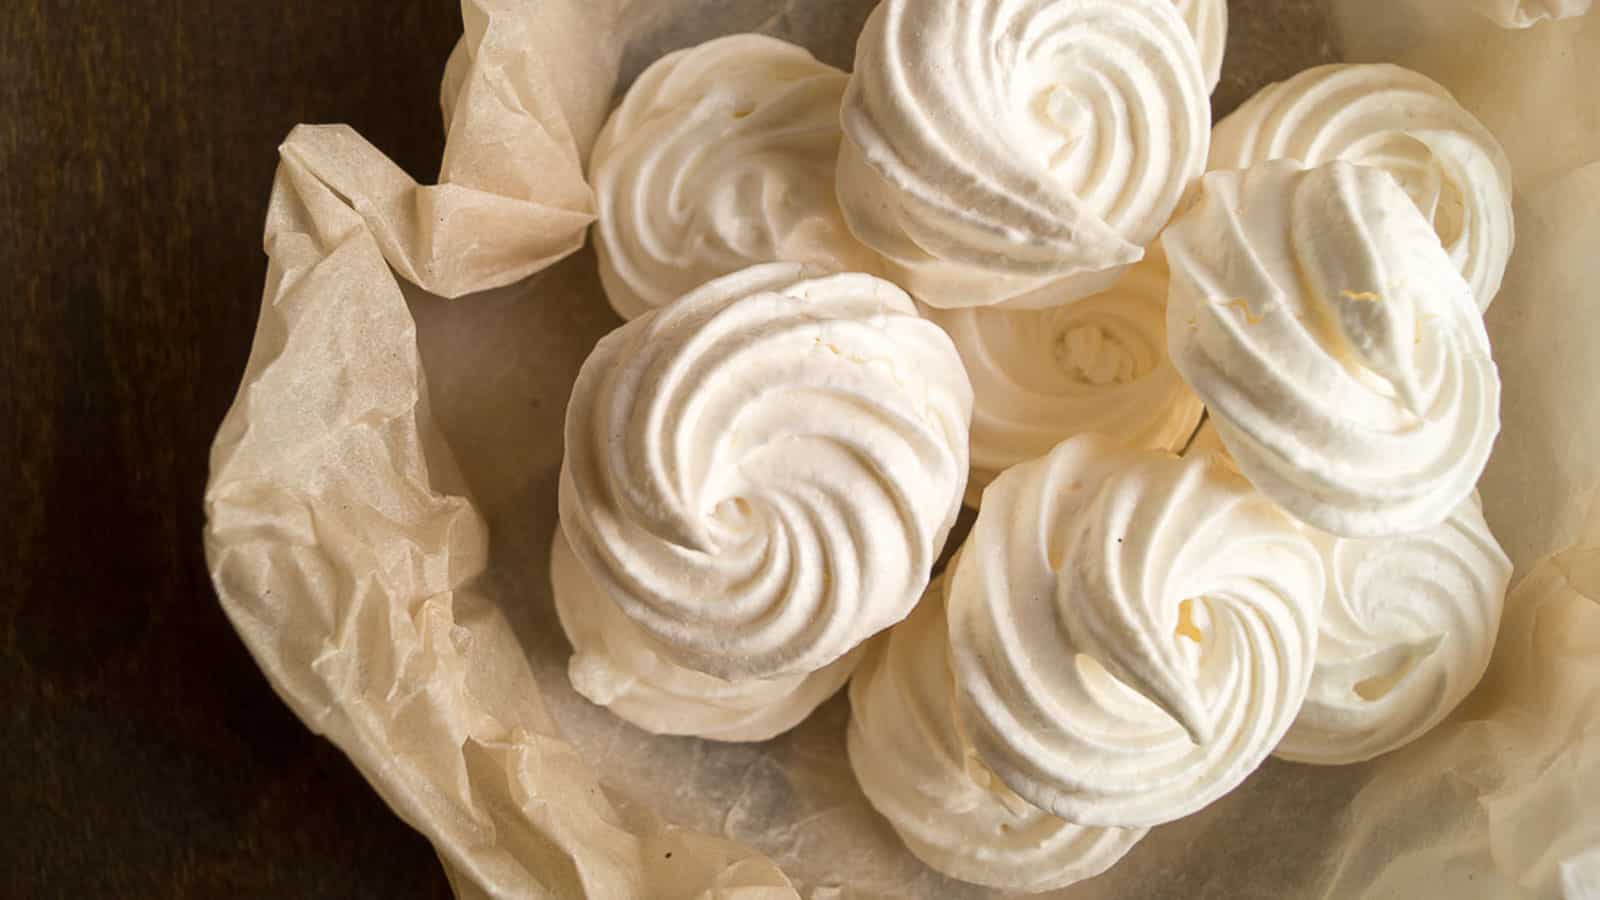 Meringue on crumpled parchment paper bag on a wooden table.